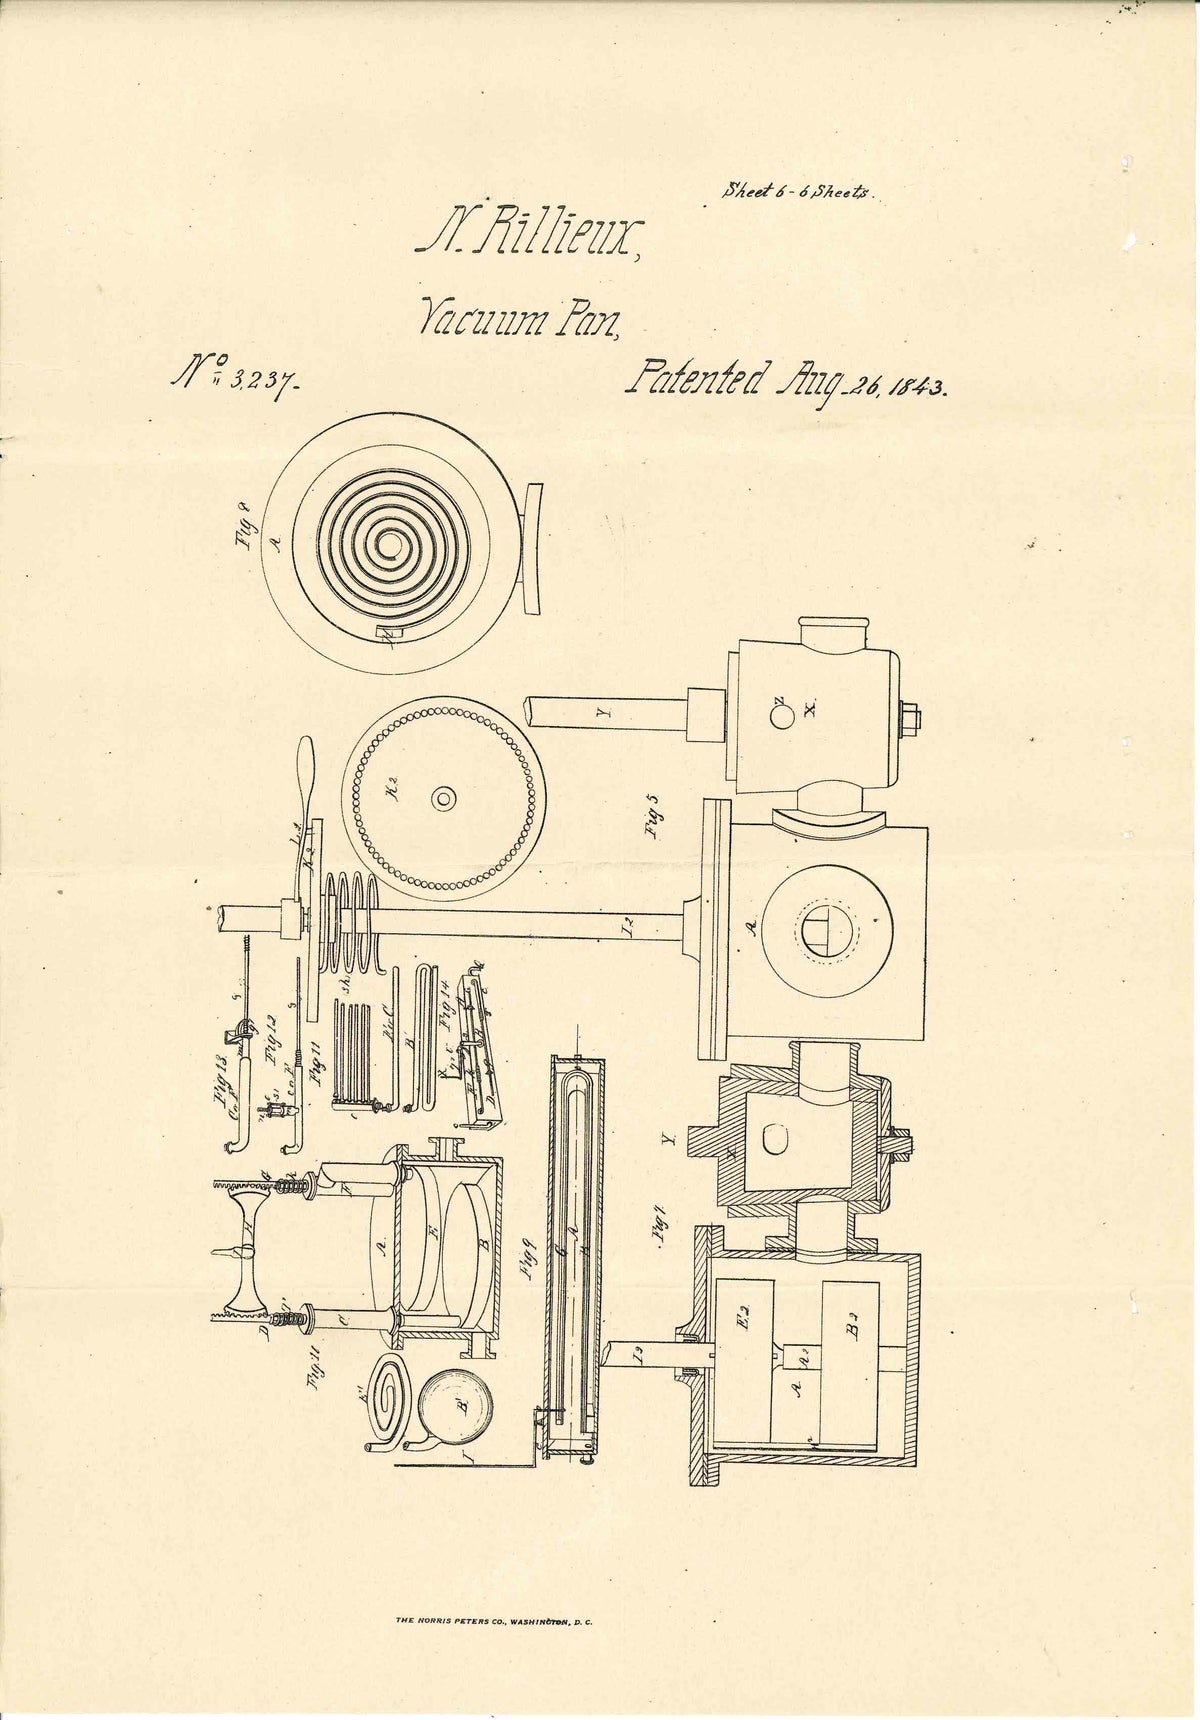 One of several patent drawings that Norbert Rillieux sent to the Patent Office